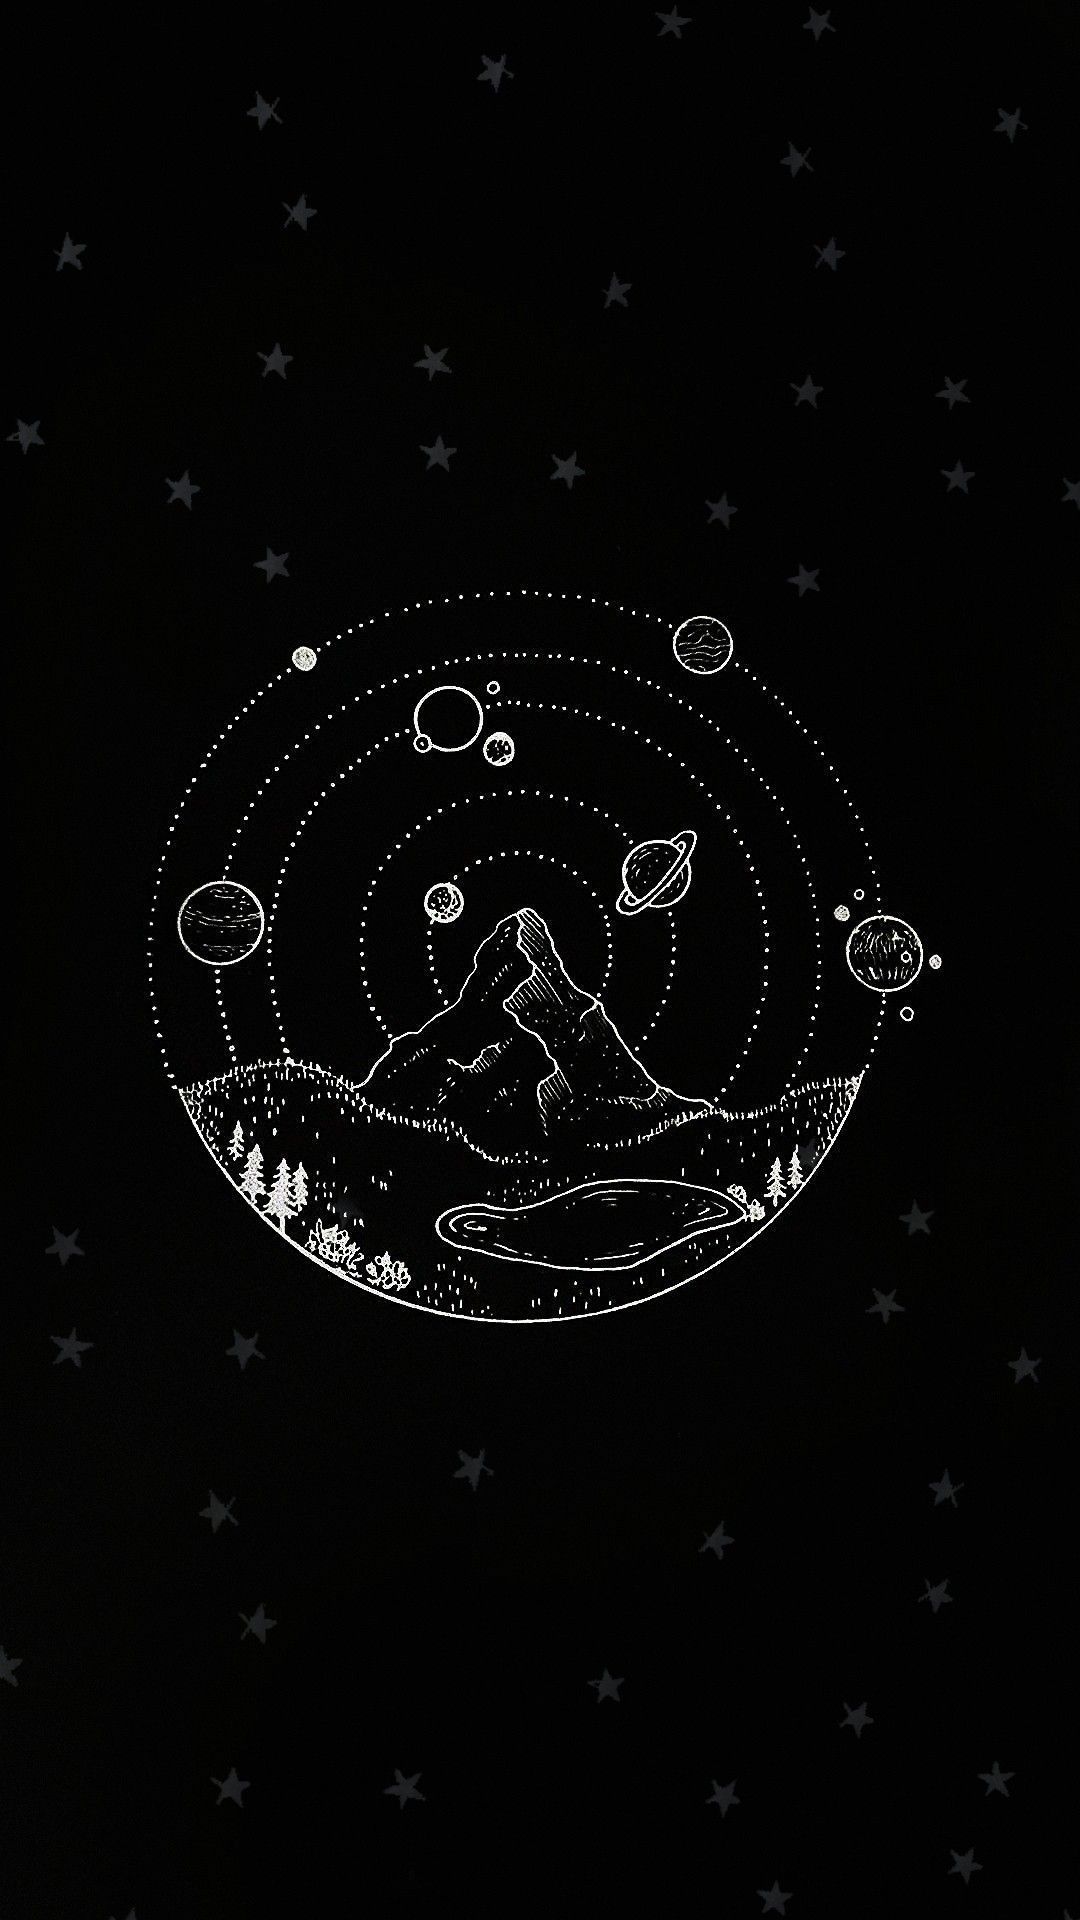 Illustration, Font, Circle, Black And White, Astronomical Object